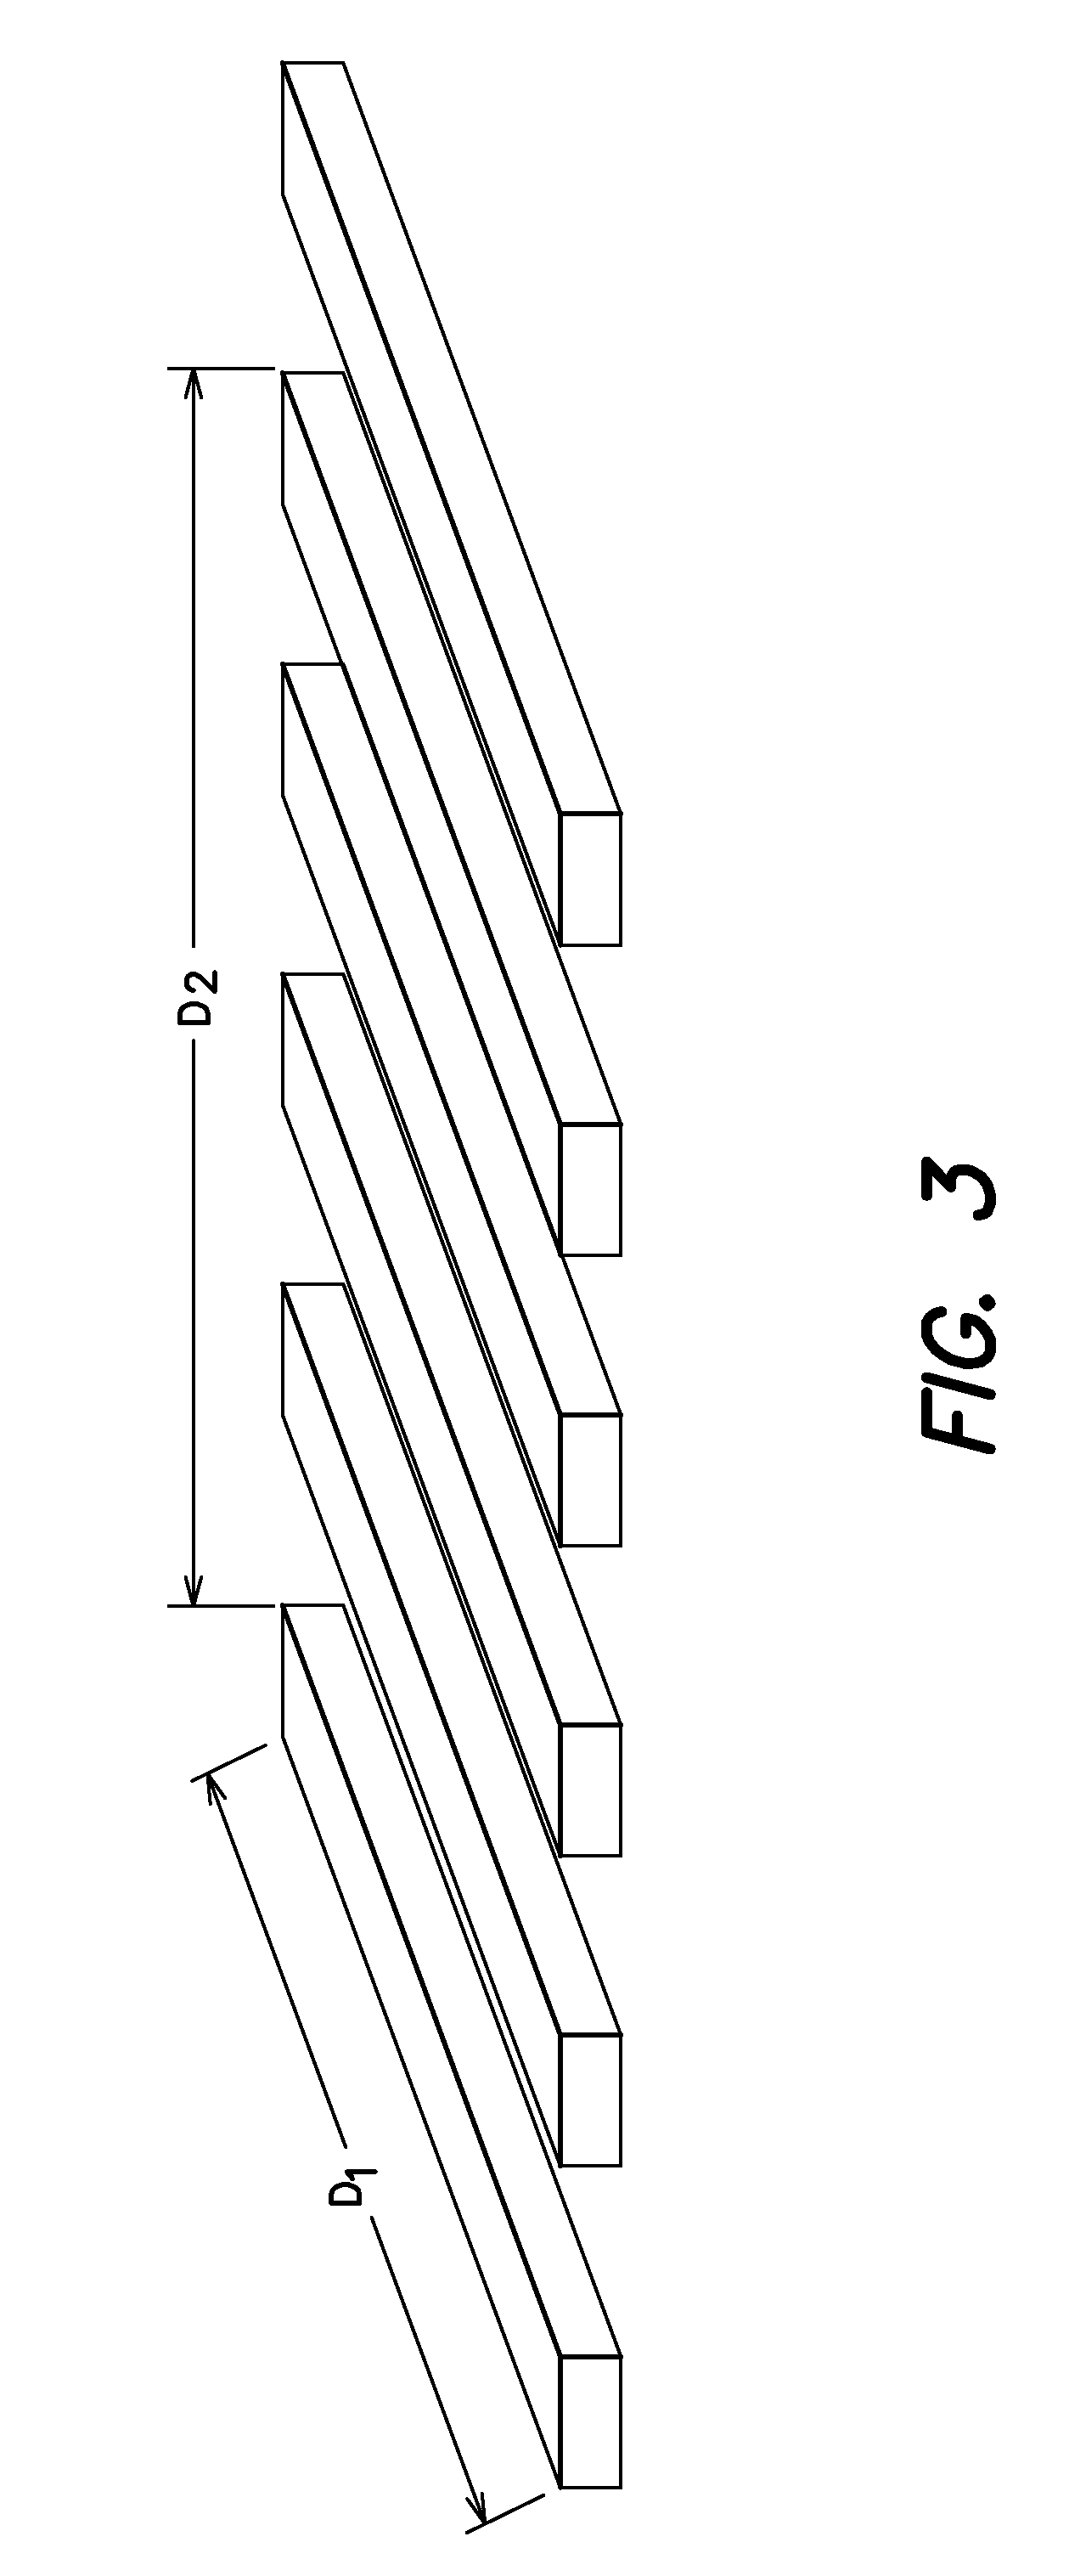 Optimization of critical dimensions and pitch of patterned features in and above a substrate